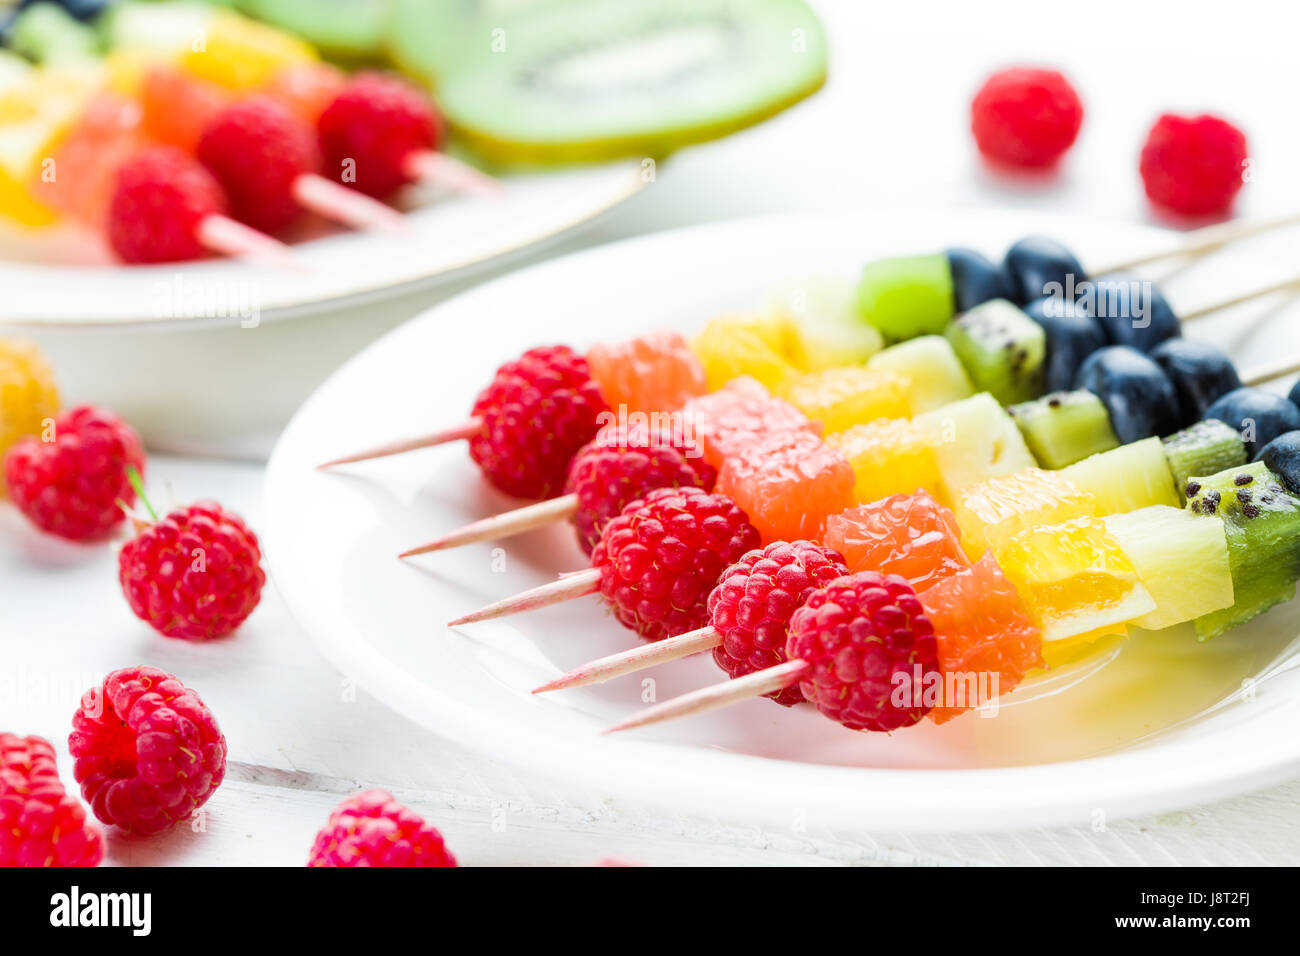 Mixed fruits and berries Stock Photo